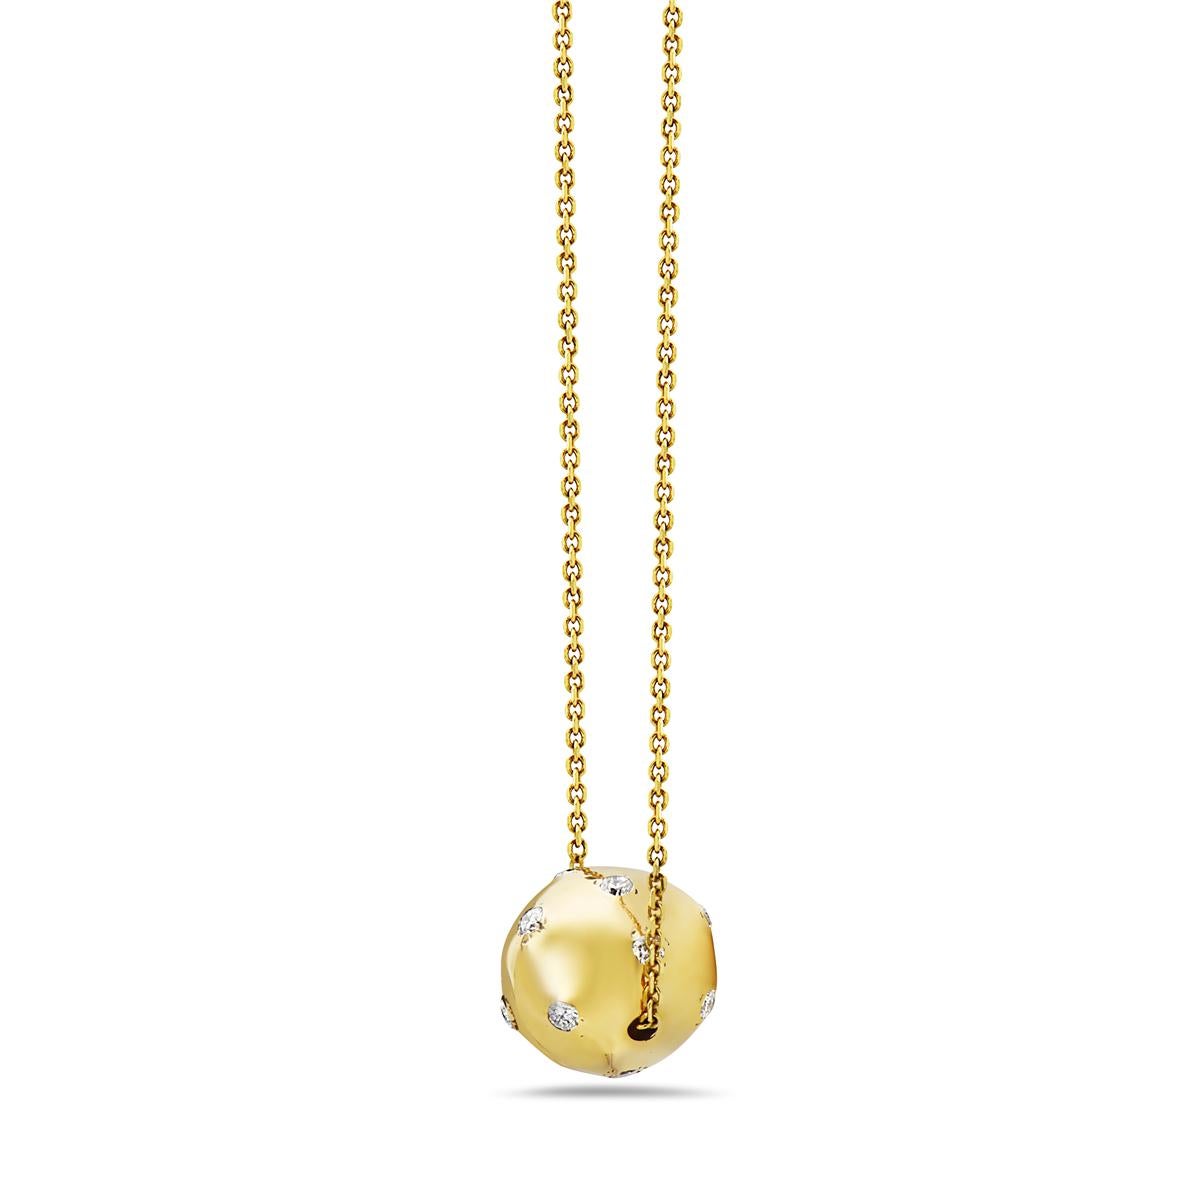 This pendant necklace features a sphere diamond encrusted pendant in 14K yellow gold. Lobster clasp closure. 0.65 carats total weight. 6.2 grams total weight 8 inch chain drop. Made in USA.  